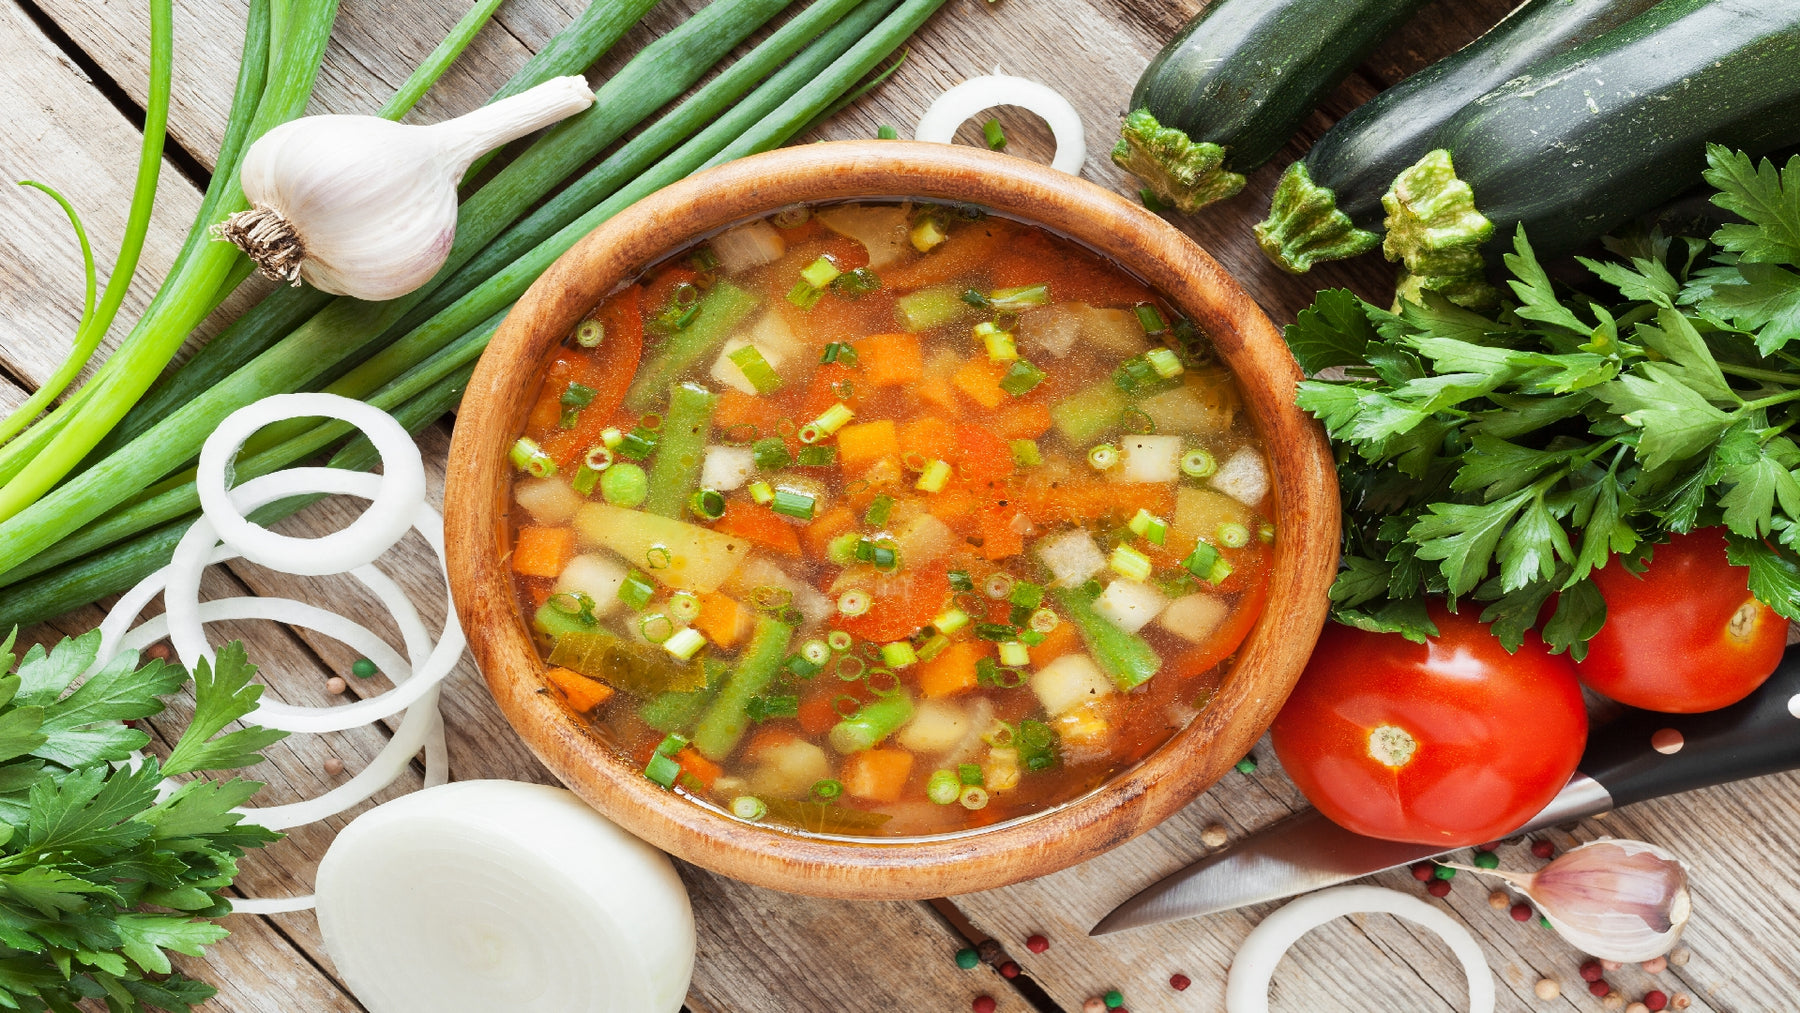 Recipe of Keto Vegetable Soup For Winters